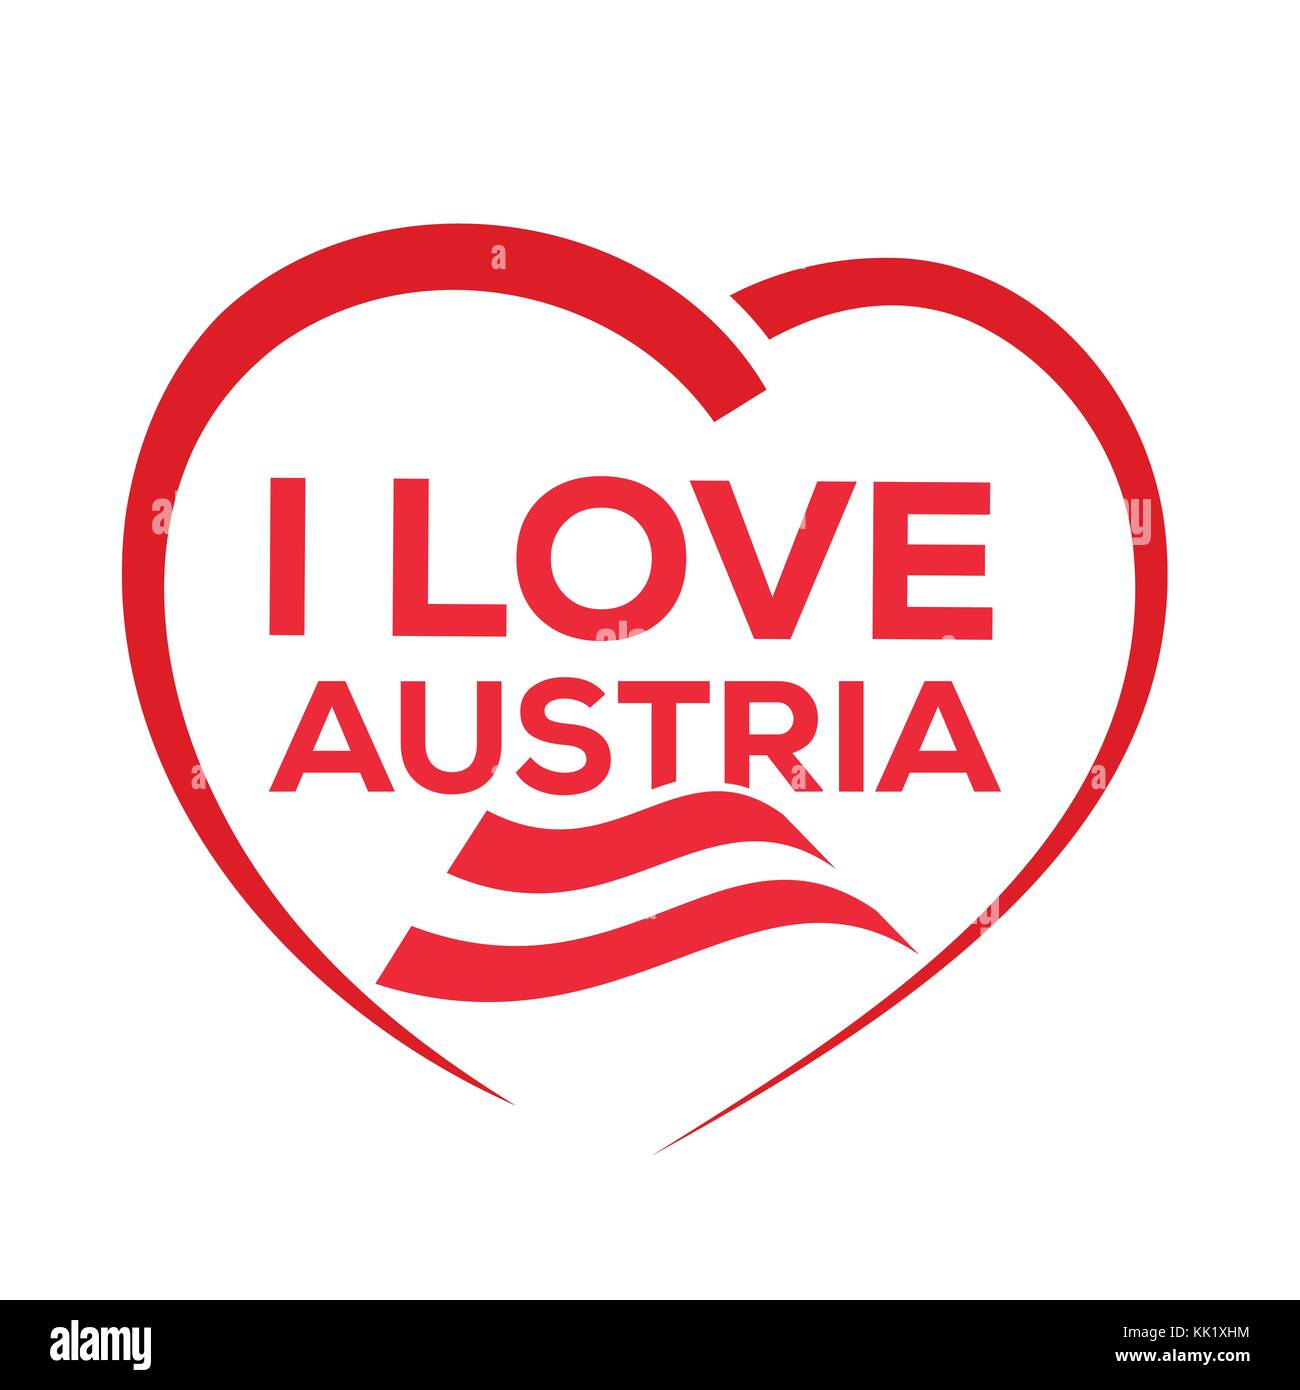 I love austria with outline of heart and austrian flag, icon design, isolated on white background. Stock Vector